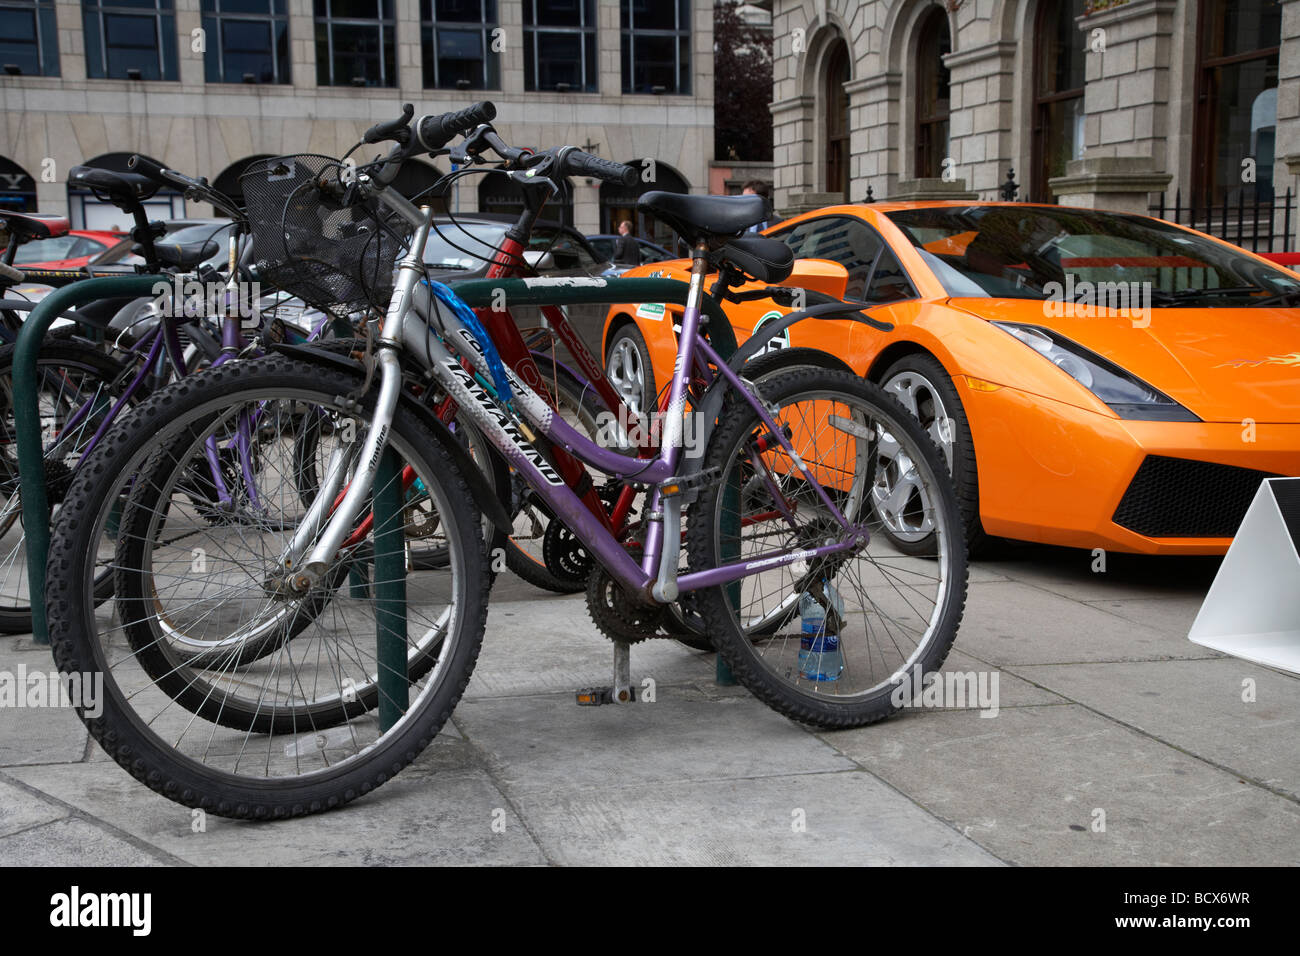 lamborghini sports car parked on pavement beside row of bicycles dublin republic of ireland illustrating wealth gap and social inequality Stock Photo